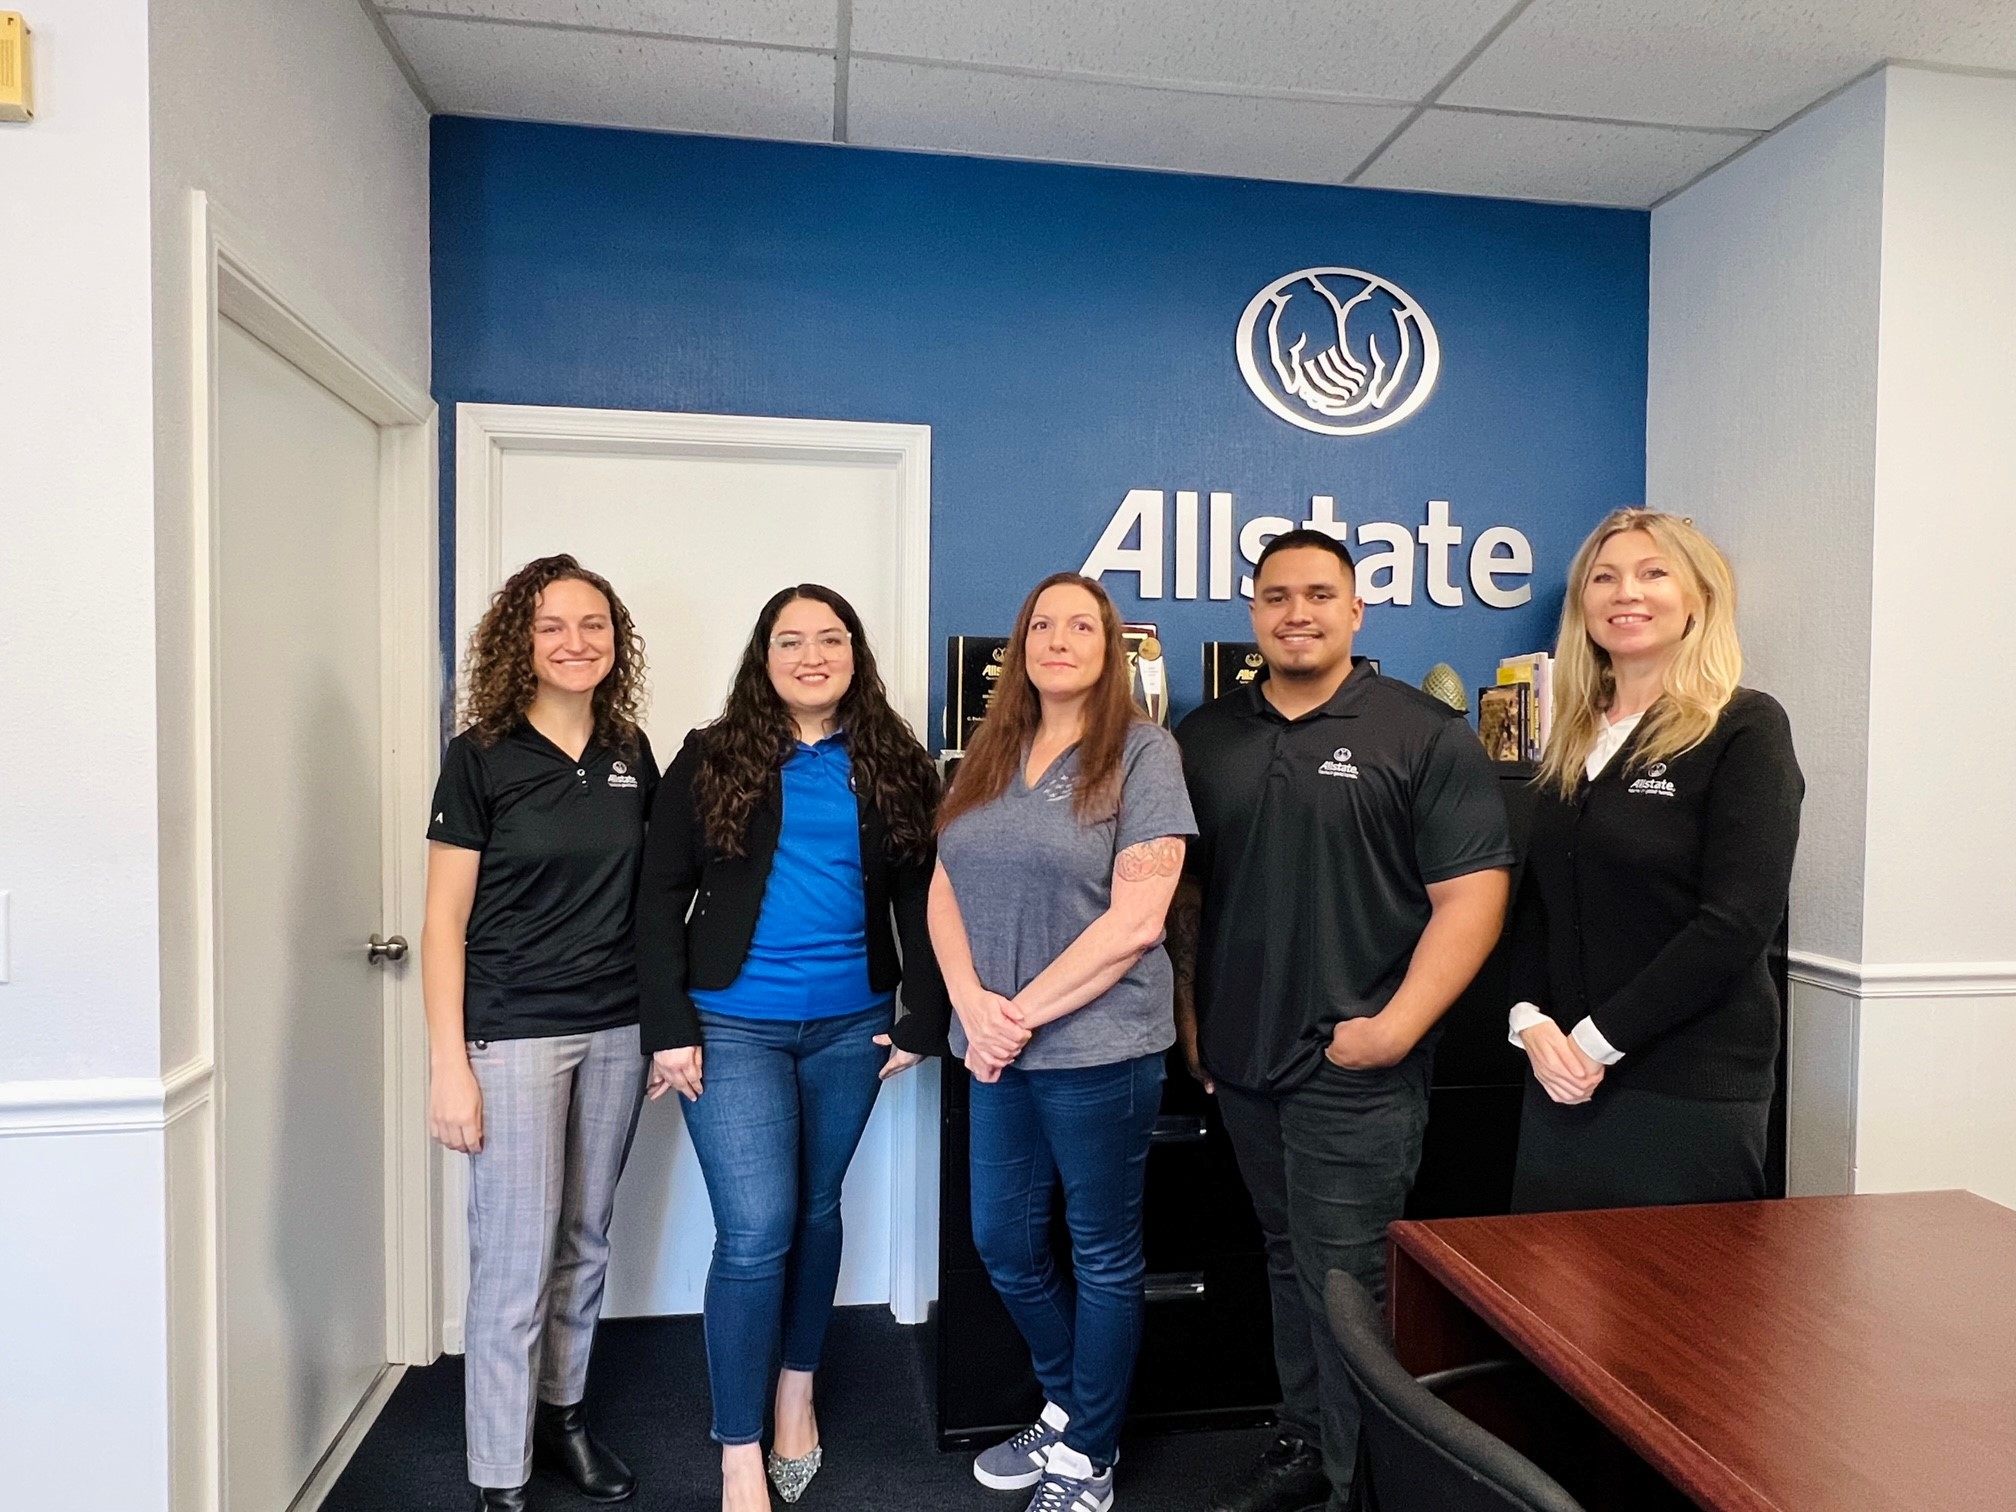 Our team is ready to assist you with your insurance needs!